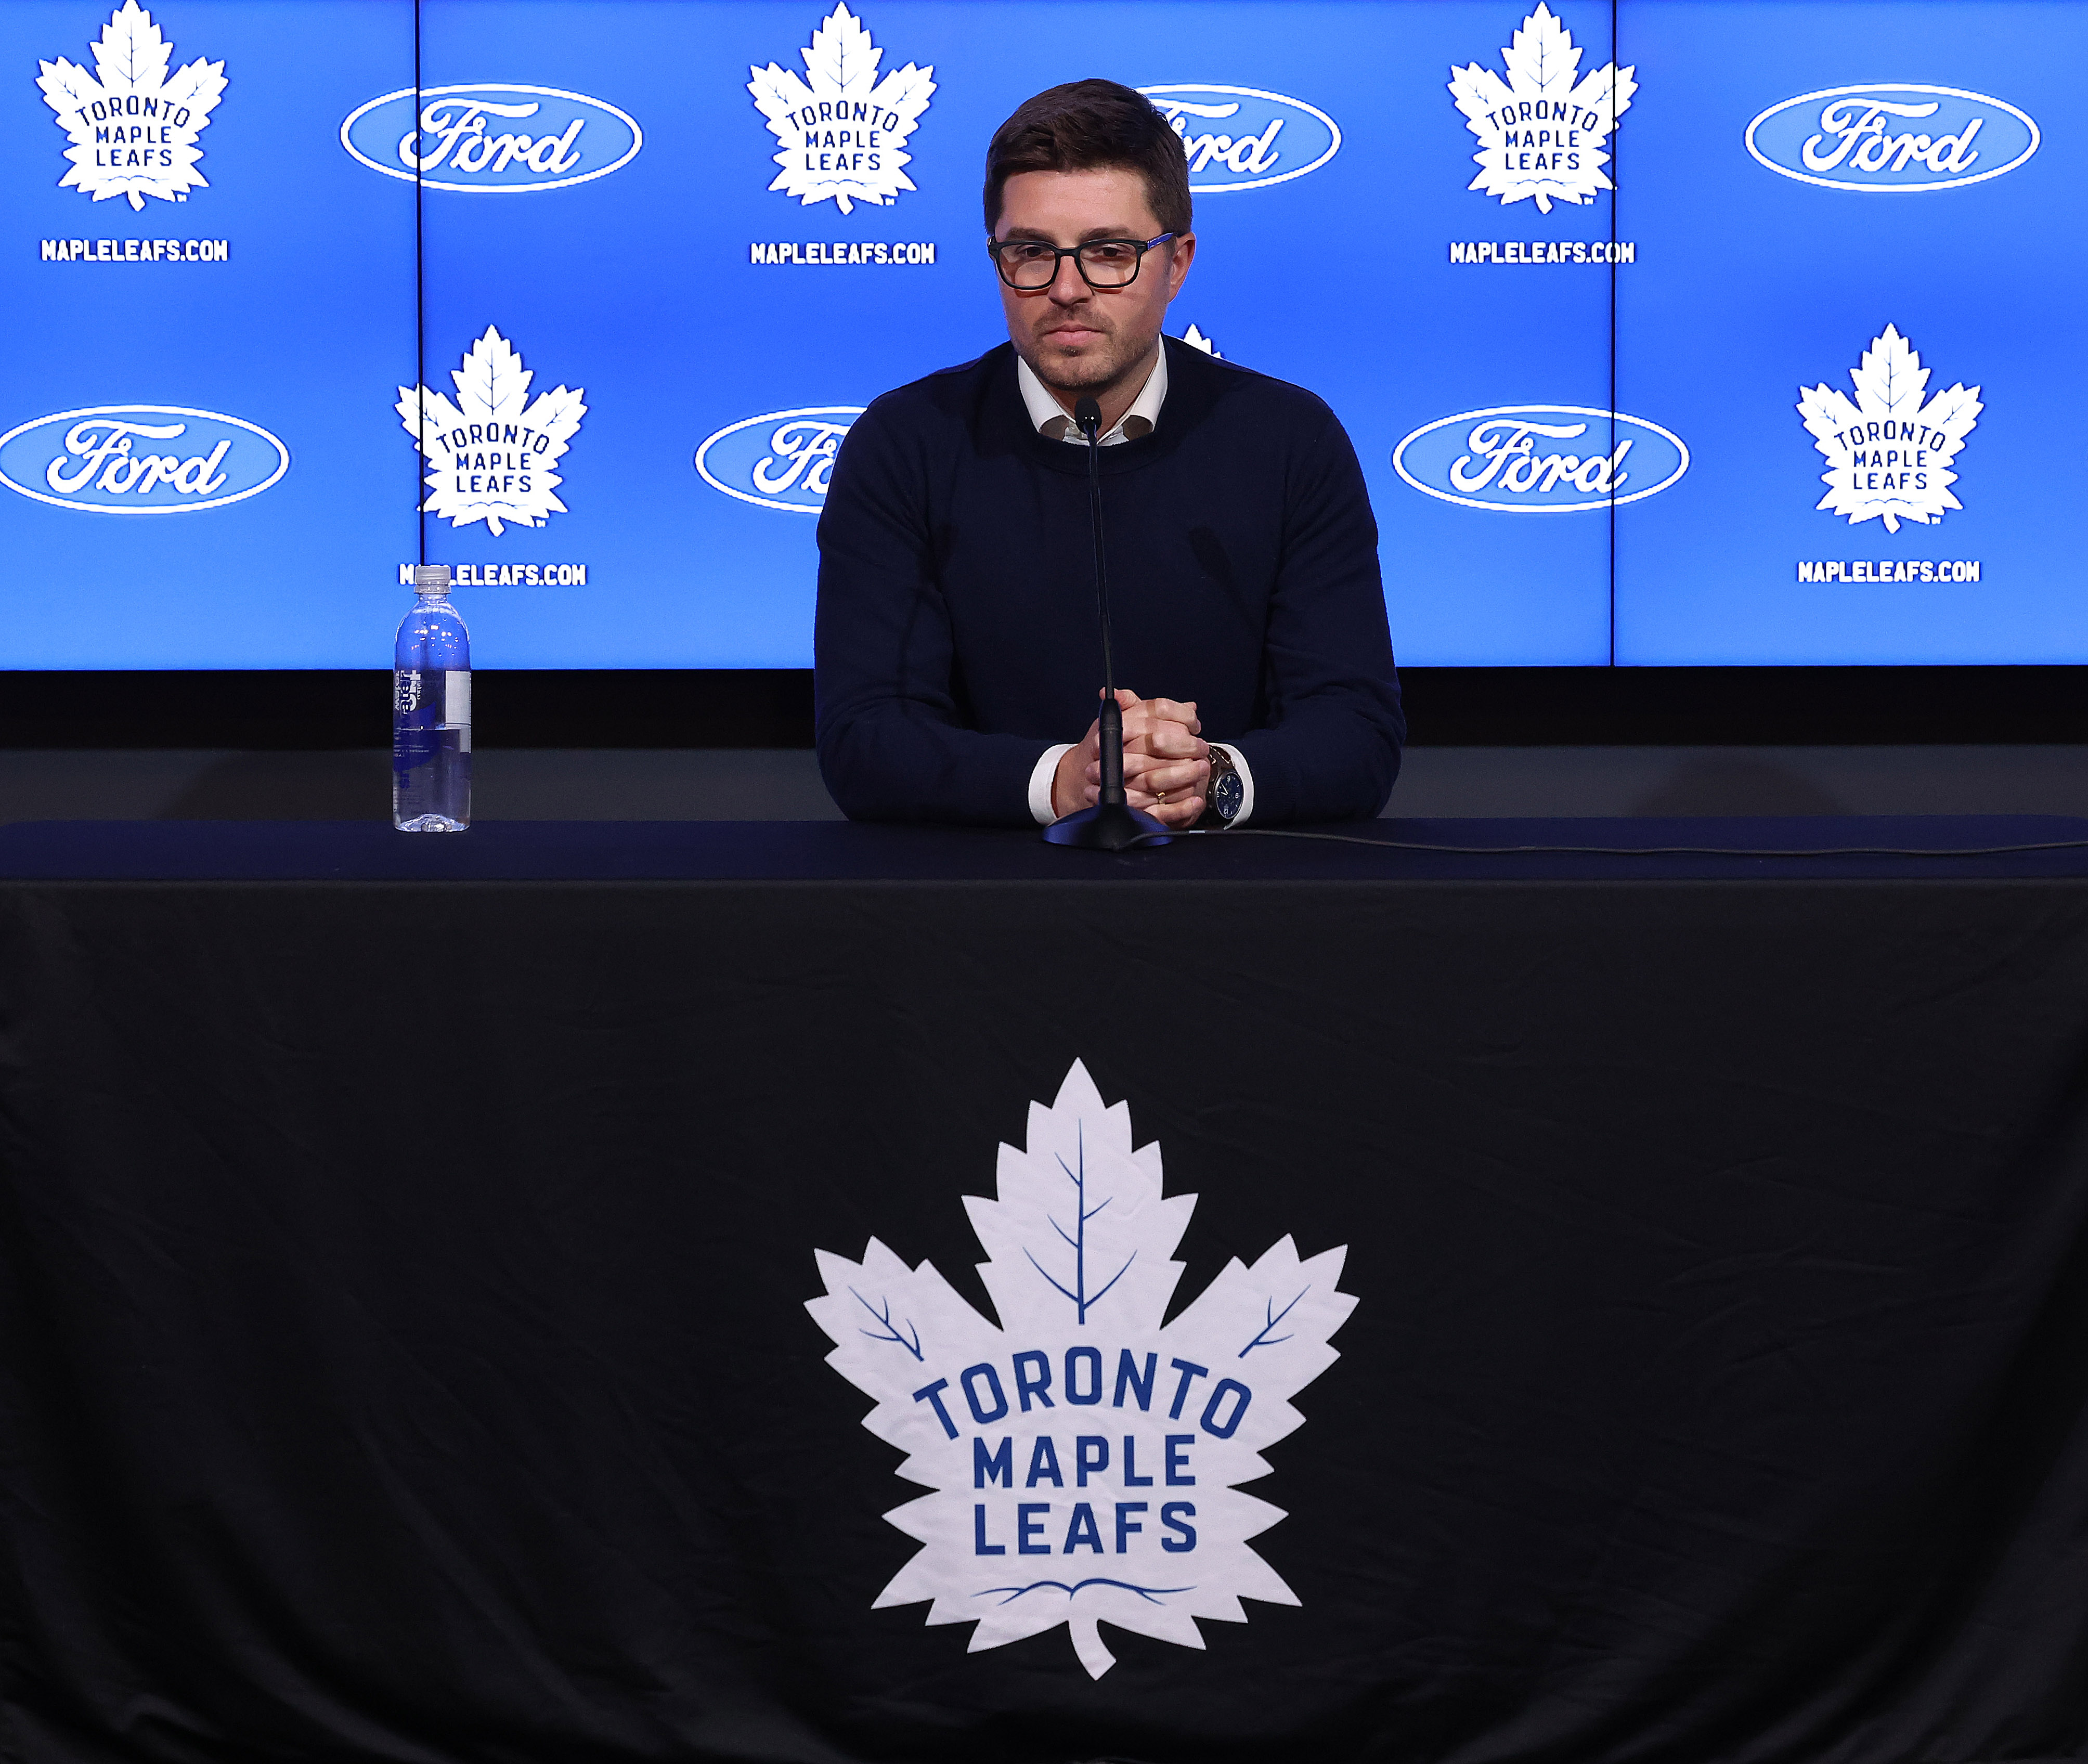 Toronto Maple Leafs clean out their lockers and hold season ending interviews after being eliminated by the Florida Panthers in the second round of the NHL Stanley Cup playoffs